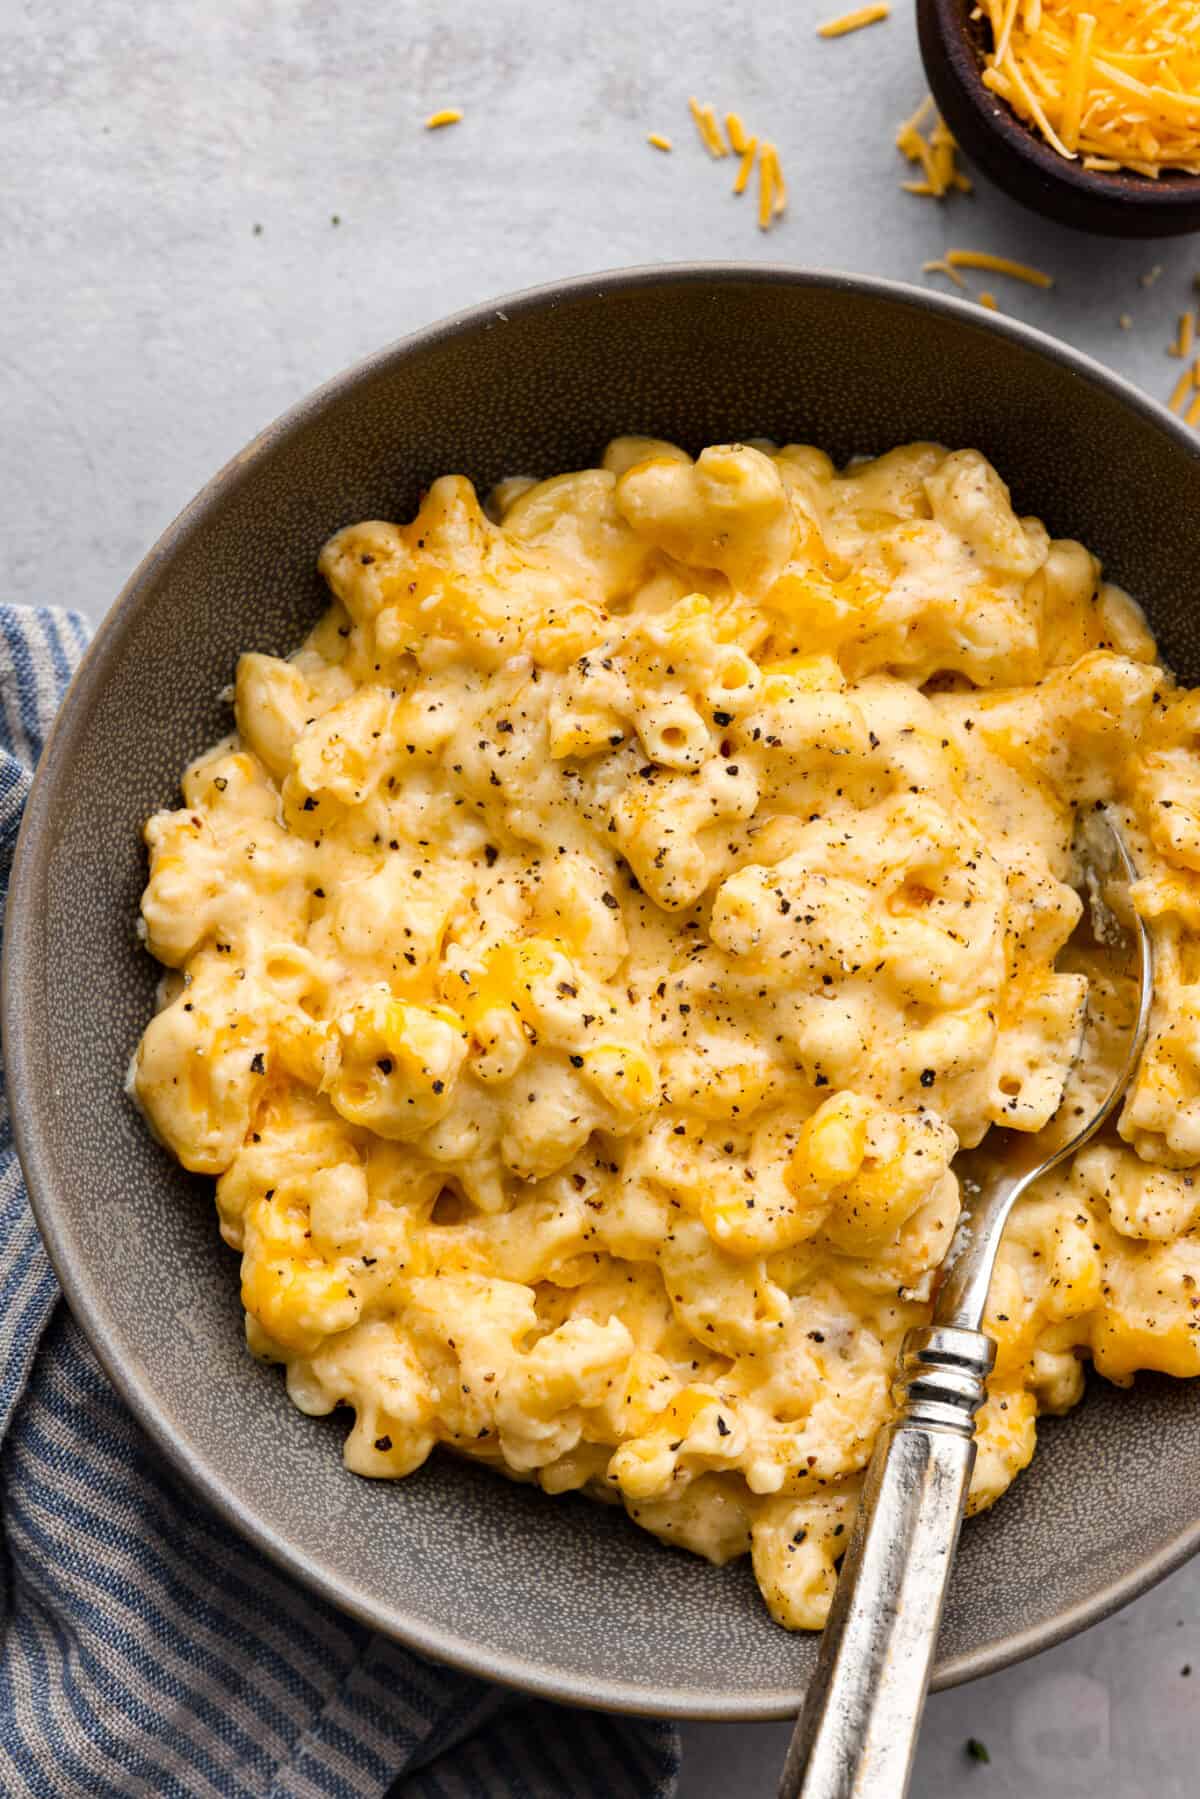 A serving of macaroni and cheese in a gray dish.